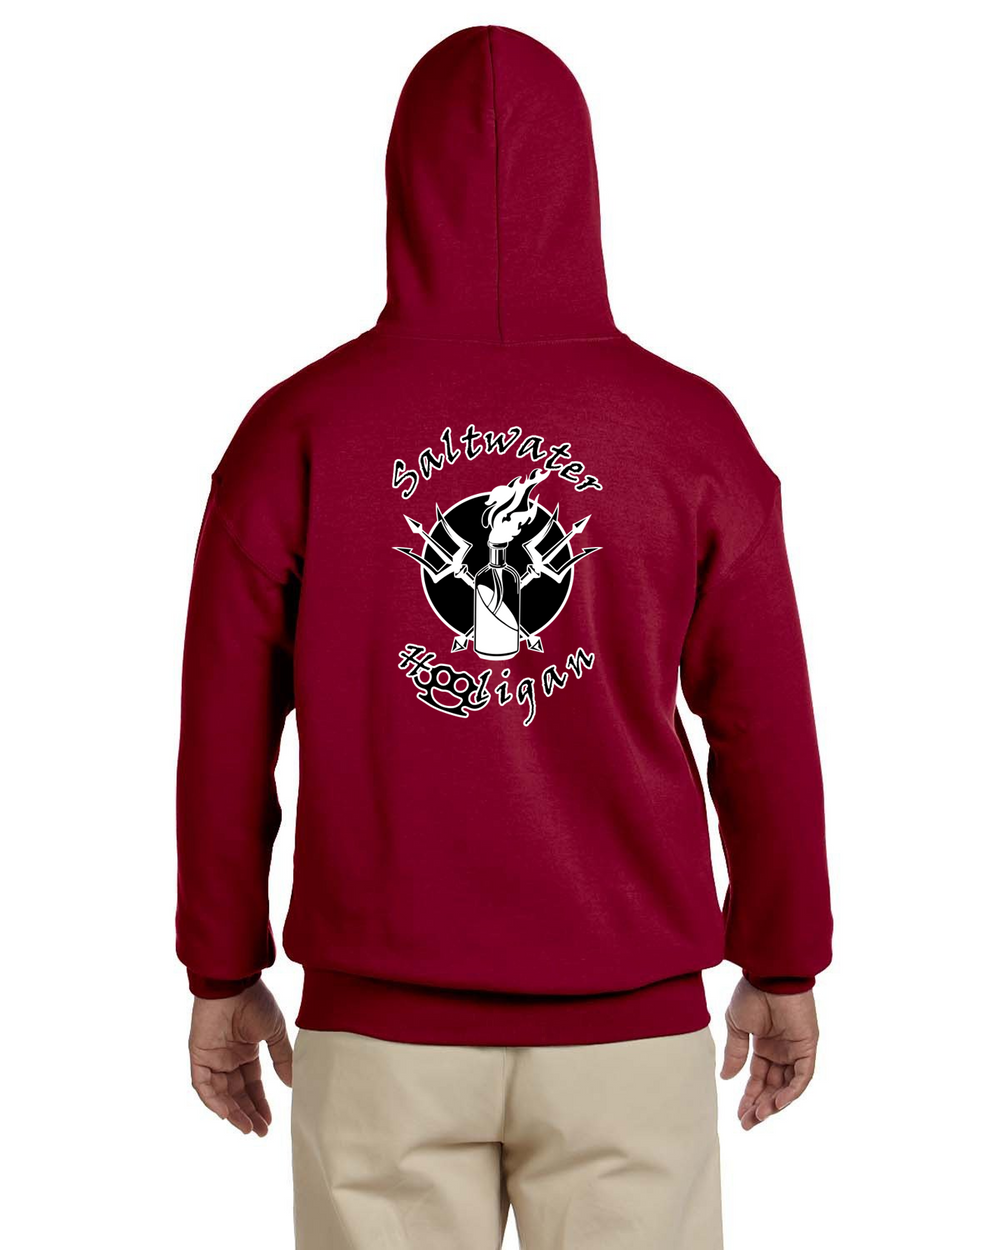 ROUND MOLITOV COCKTAIL Hoodie-red color